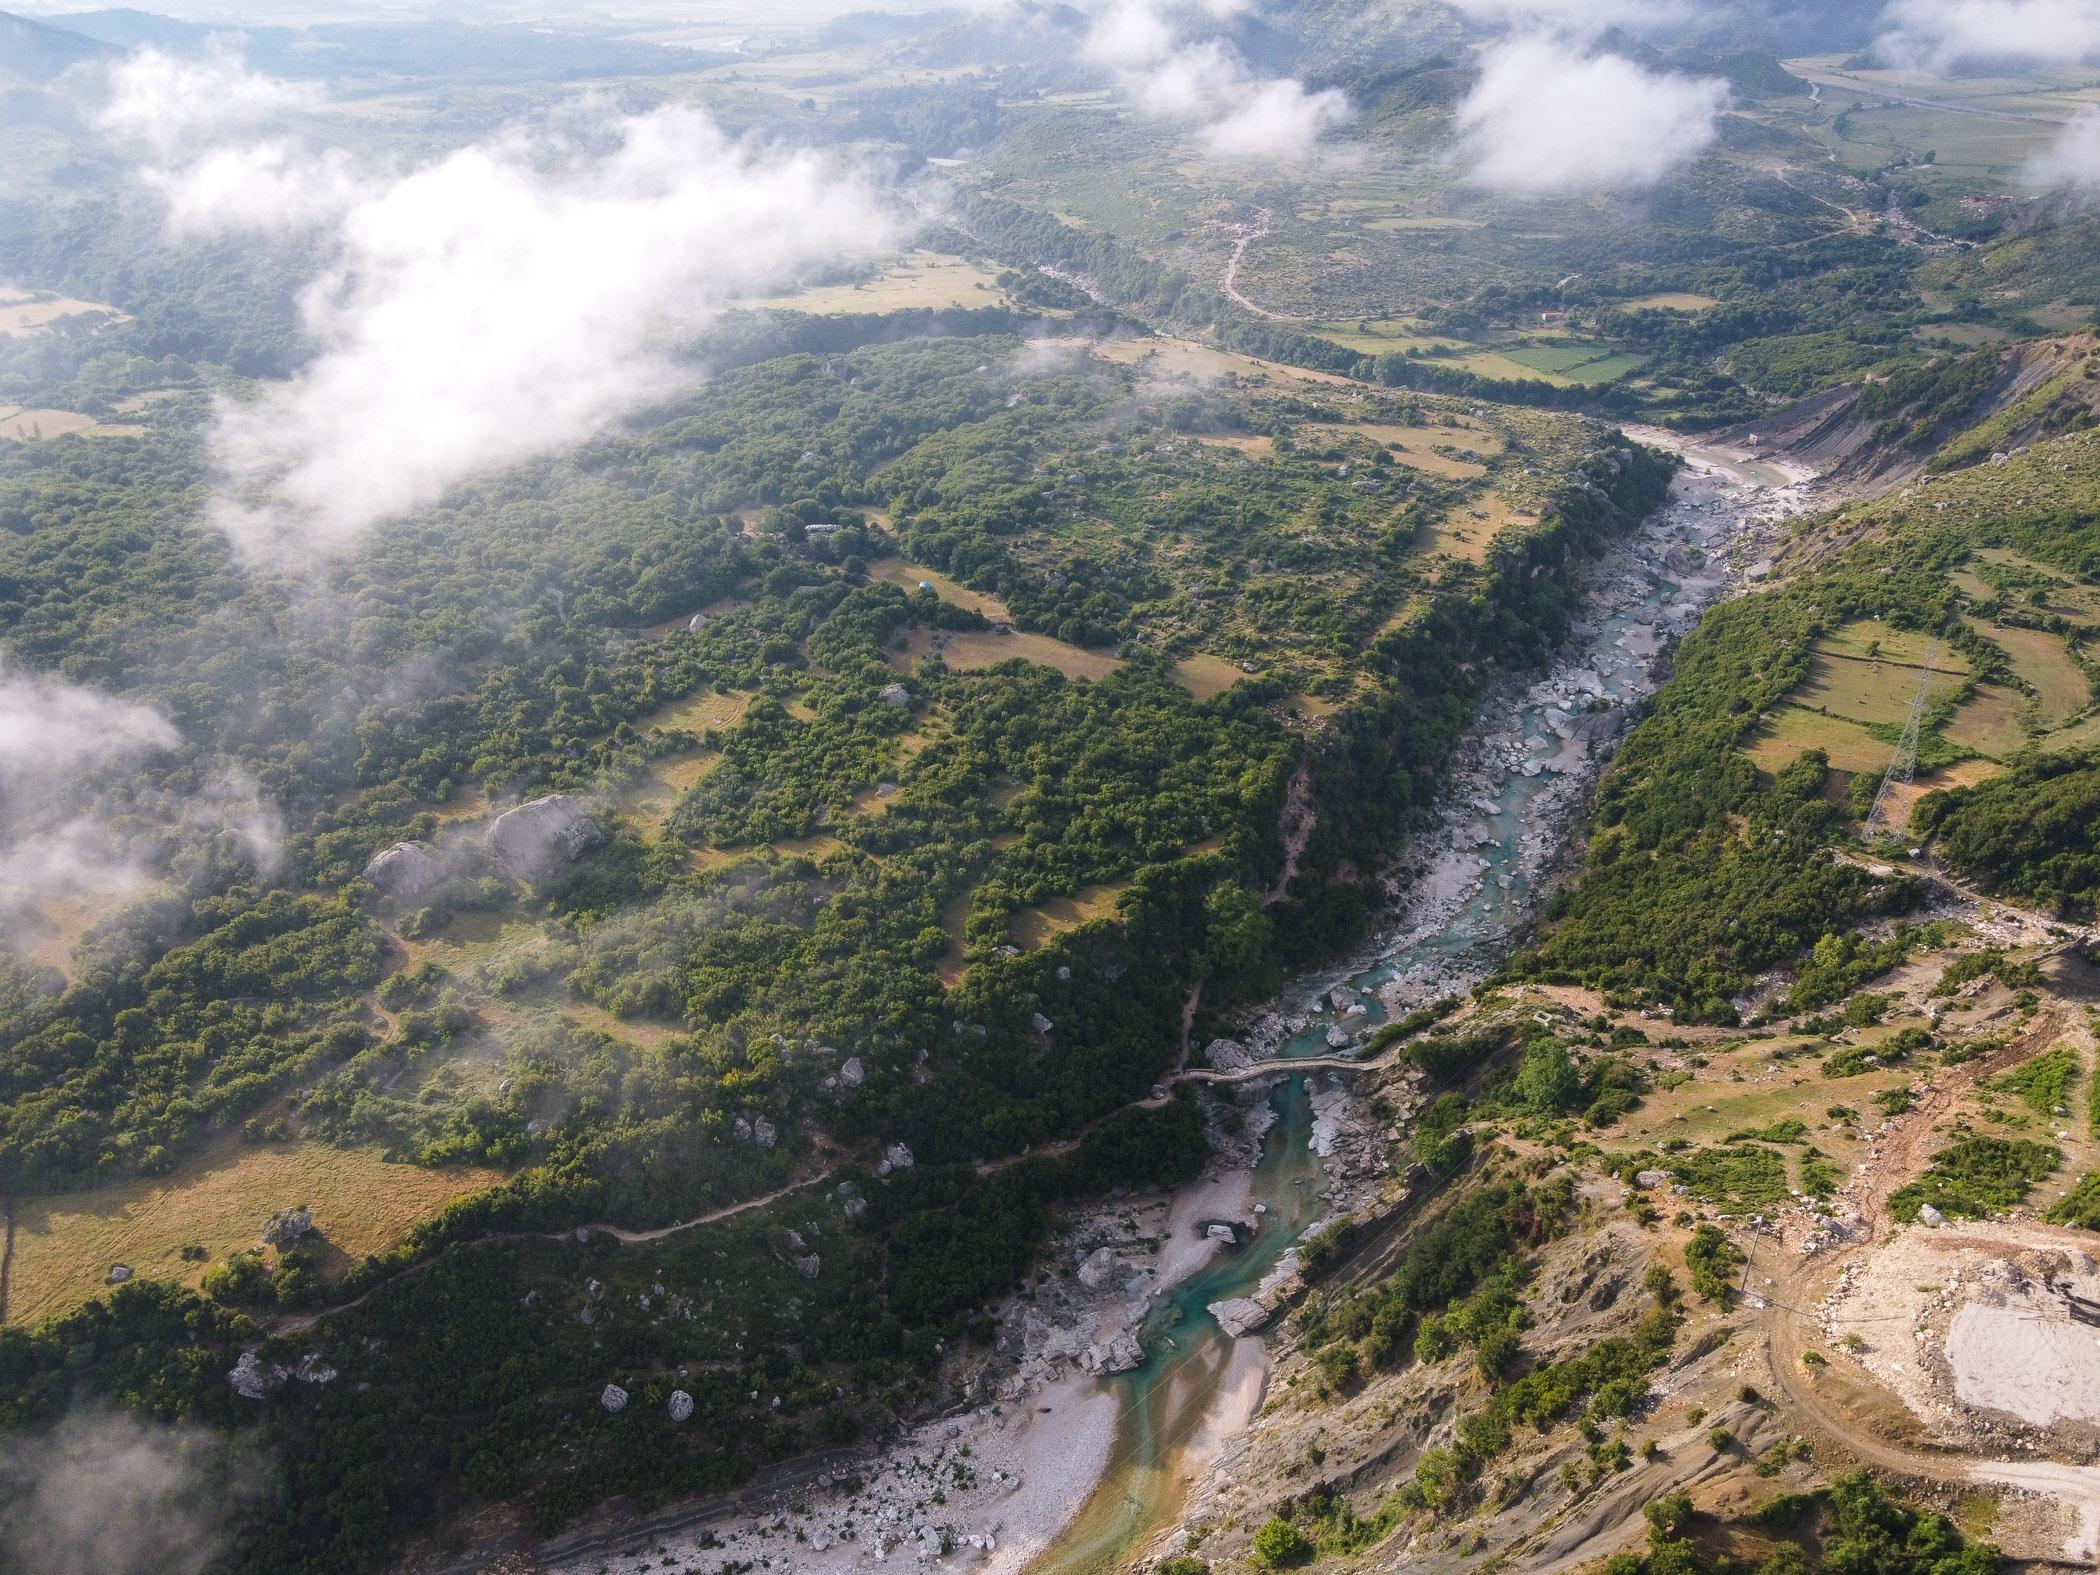 The Shushica river, near the village of Brataj in southern Albania. The Shushica is one of several unspoiled tributaries of the Vjosa, contributing to the natural functioning of the entire river system, and is still a crucial water source for local agricultural communities. Multiple small scale dams are slated for construction on the Shushica.